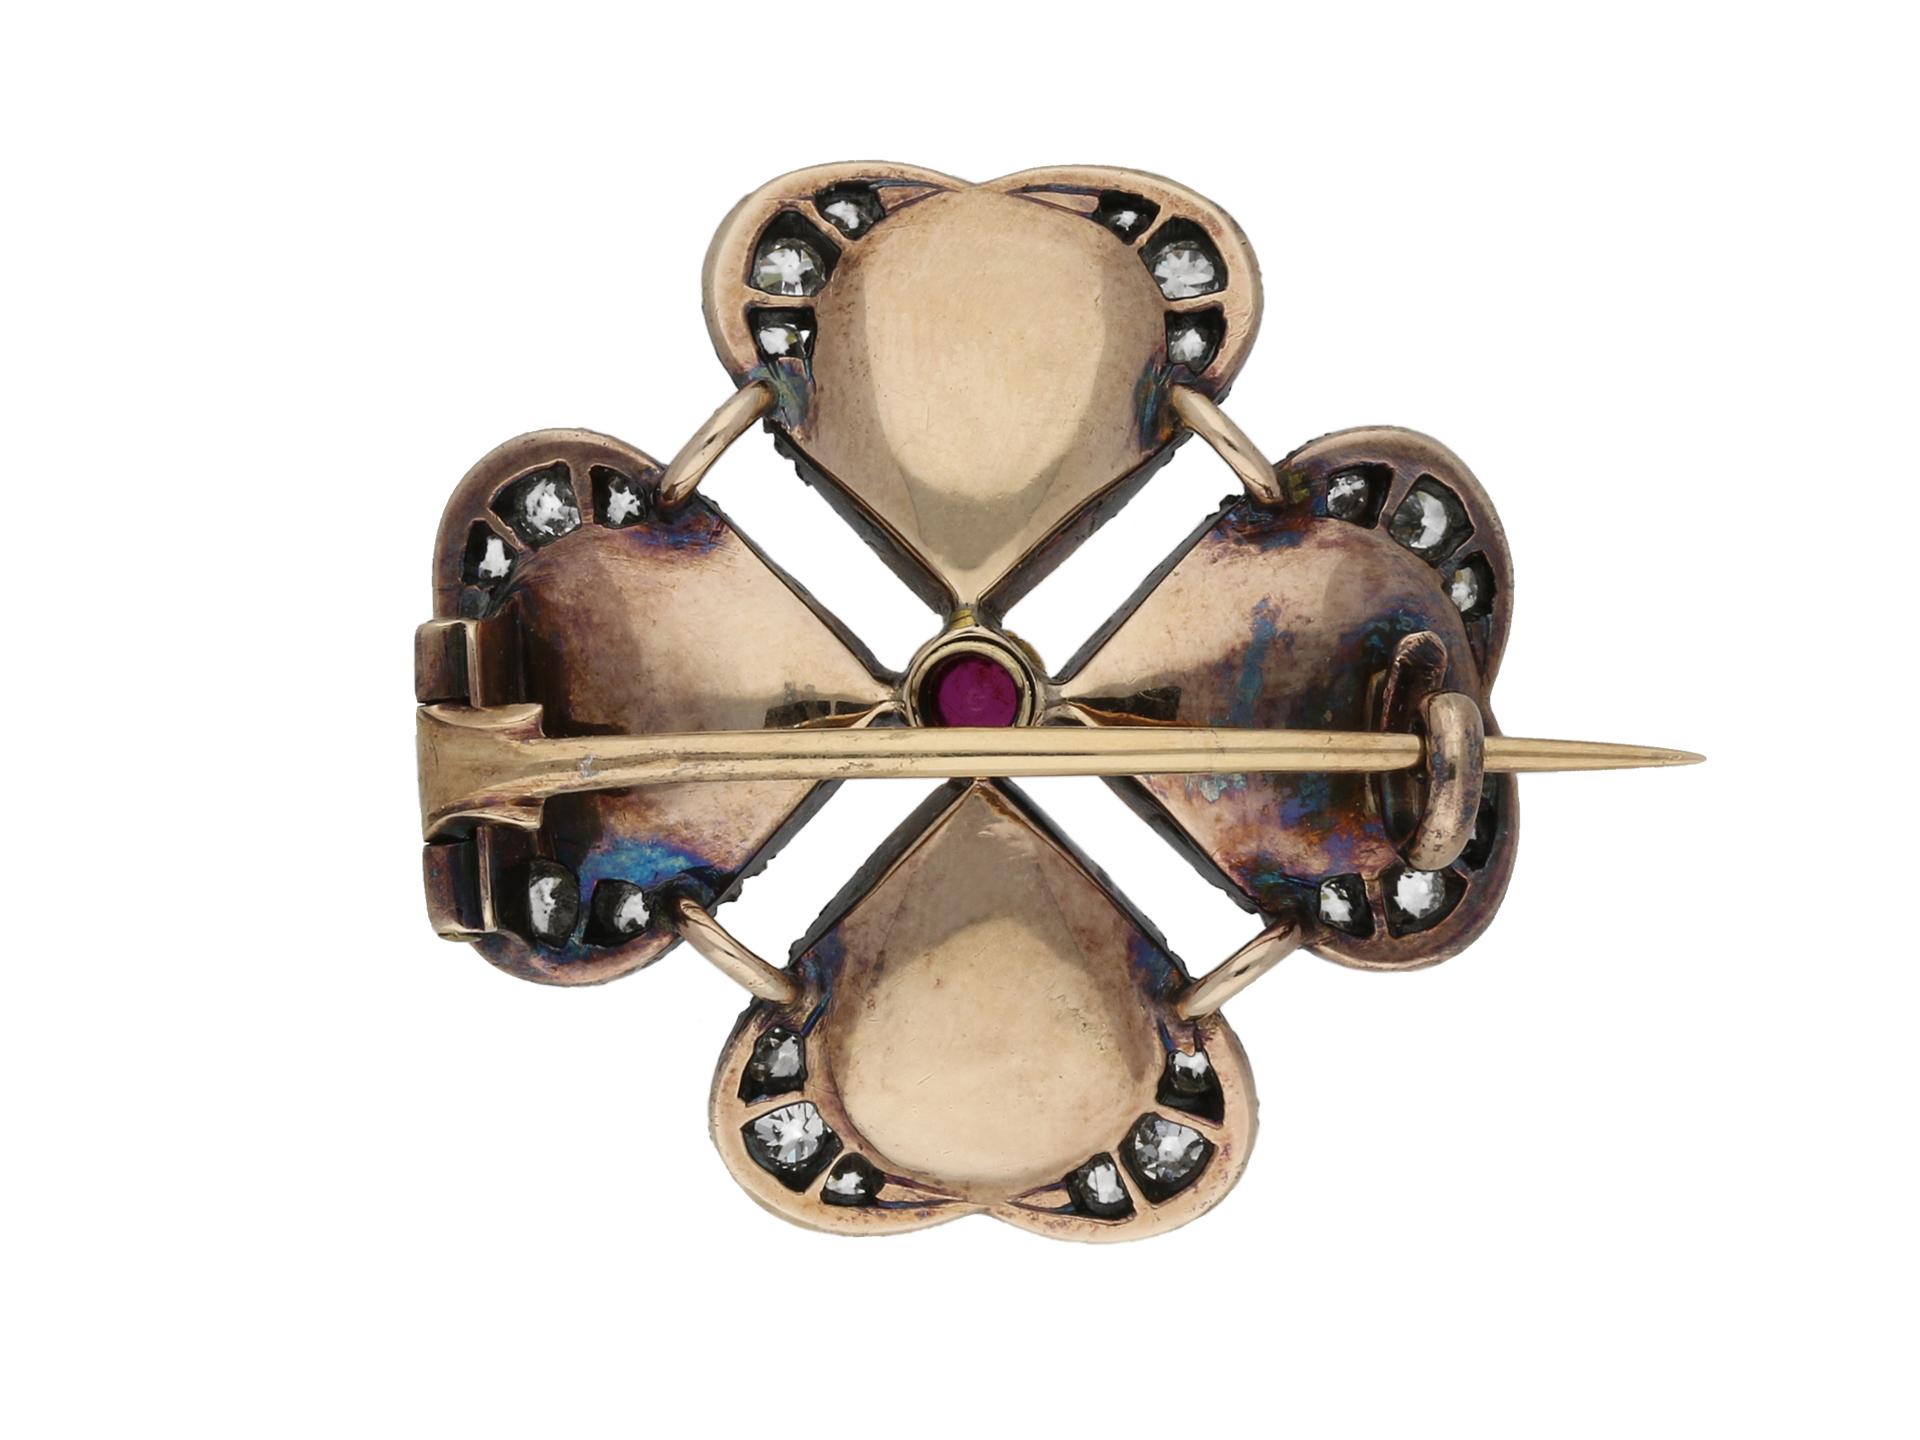 Moonstone, diamond and ruby cabochon brooch by Carlo & Arthur Giuliano, circa 1890. Four large drop shaped moonstone cabochons with an approximate combined weight of 10.00cts, in a quatrefoil setting with six round old cut diamonds to each outer